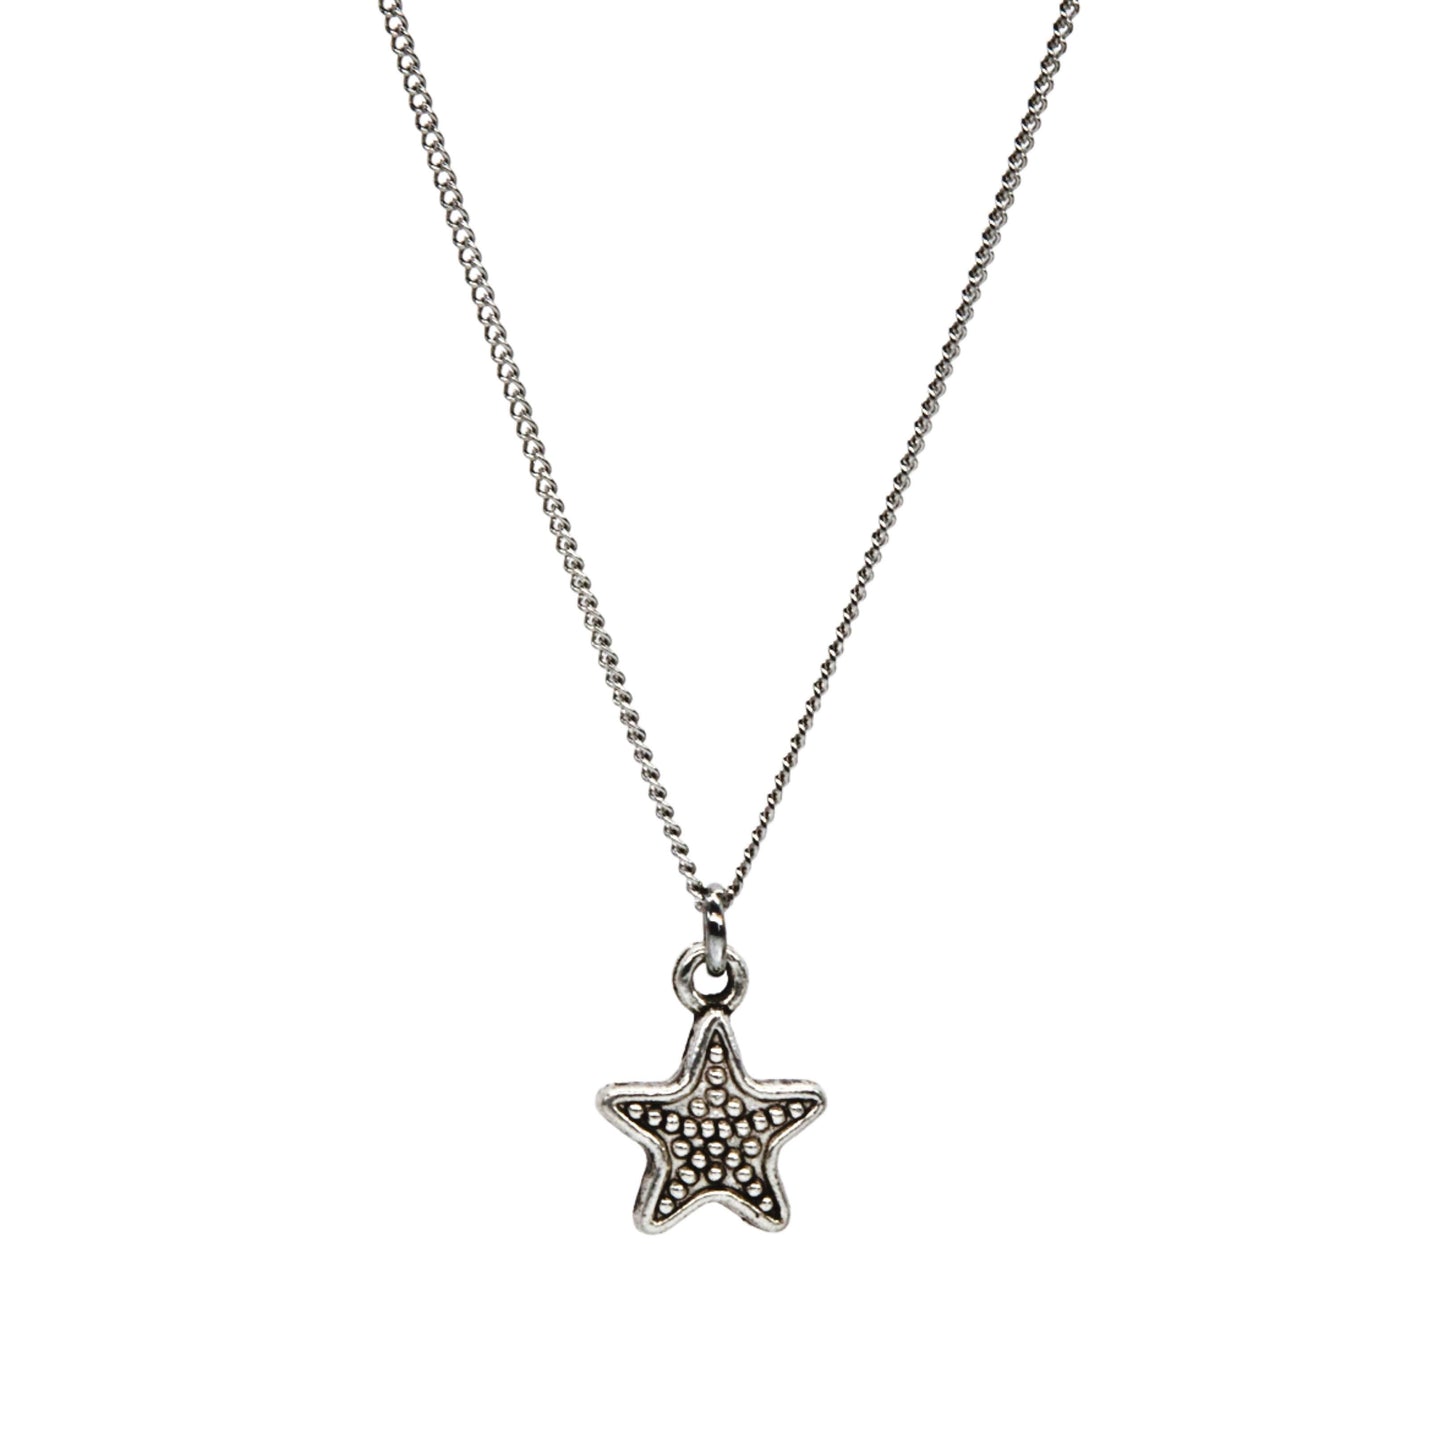 Silver Starfish Outline Necklace - Adjustable Length